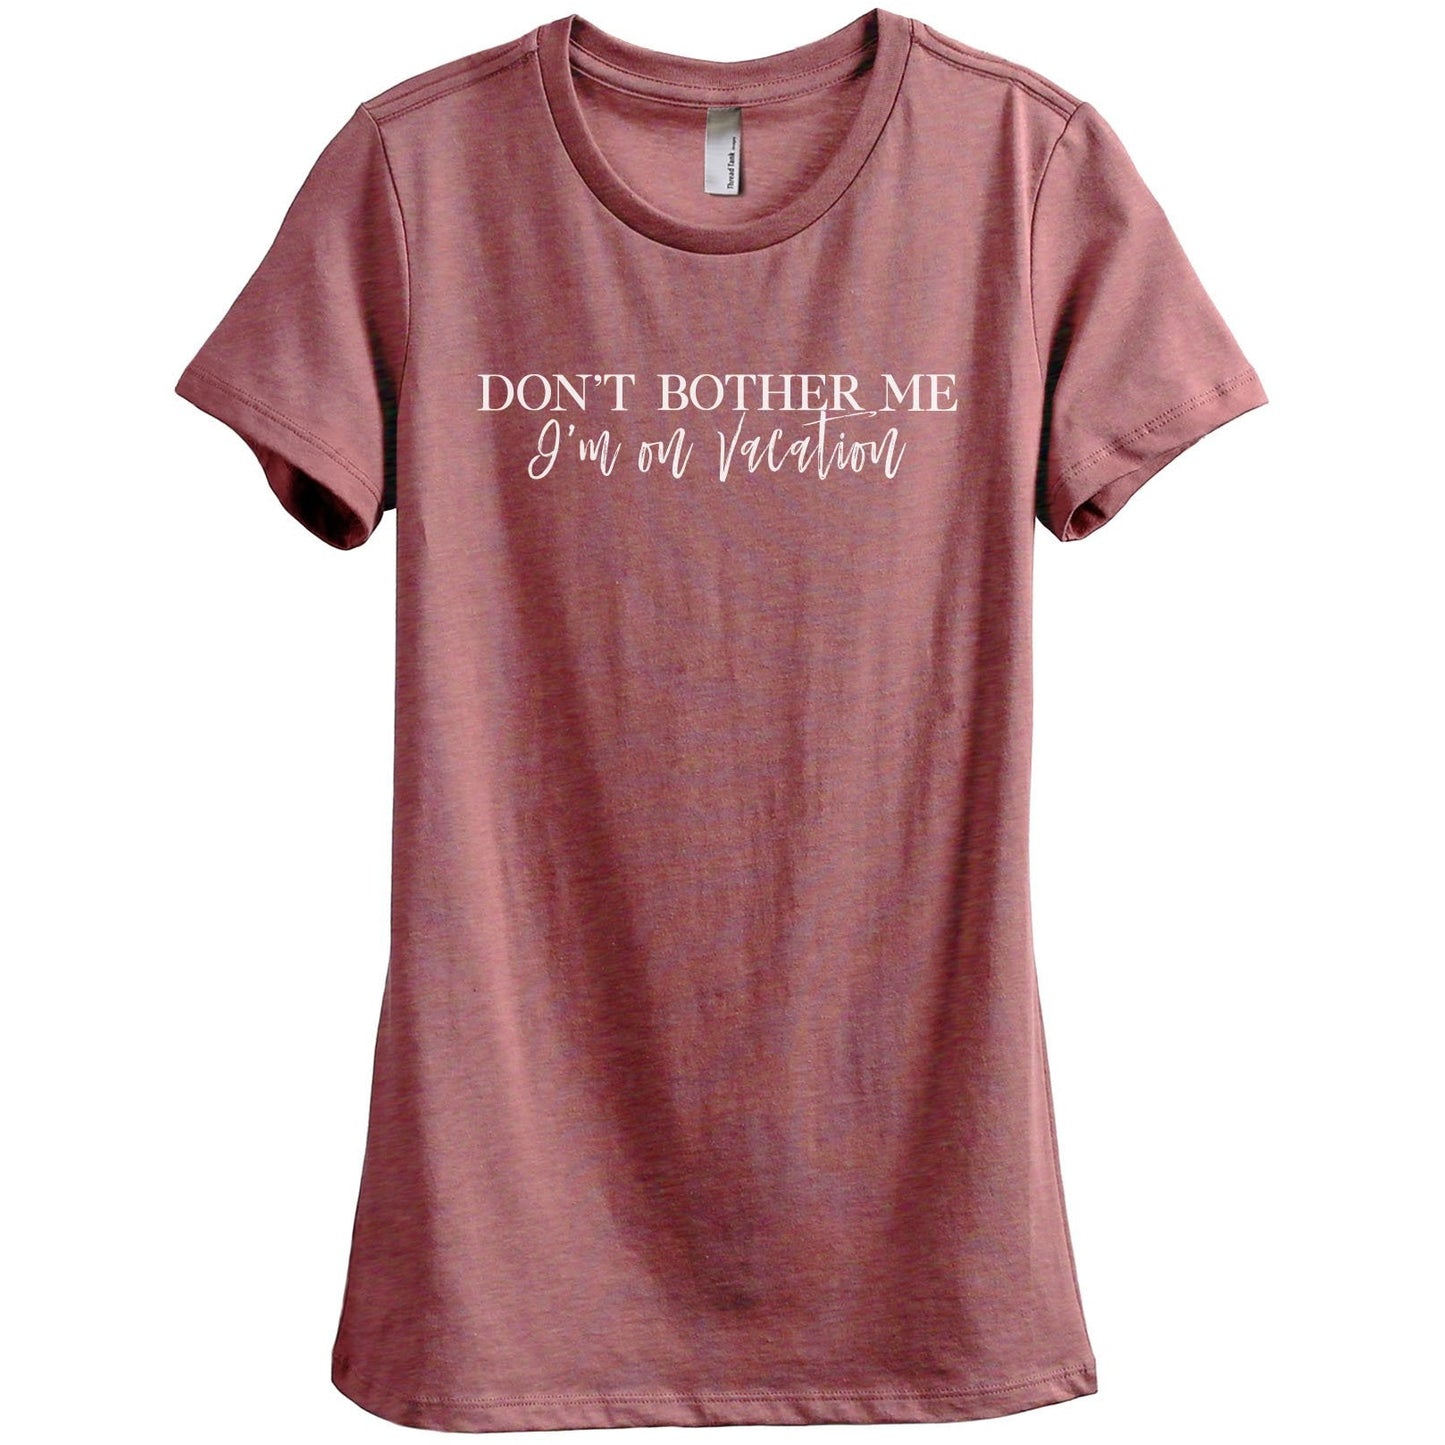 Don't Bother Me I'm On Vacation - Thread Tank | Stories You Can Wear | T-Shirts, Tank Tops and Sweatshirts